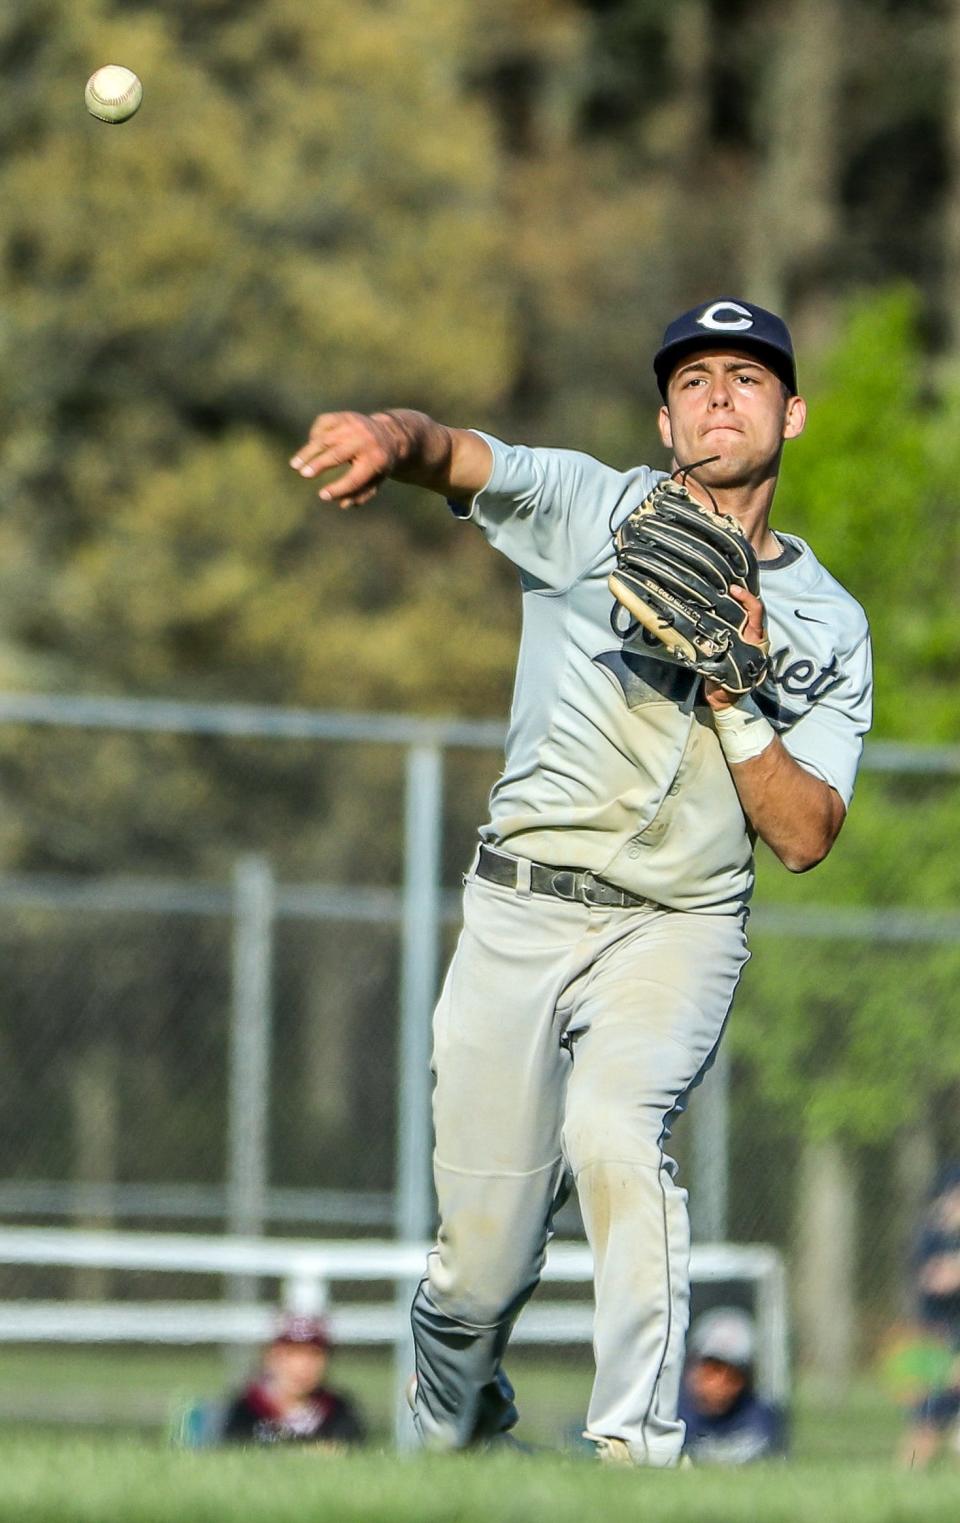 Cohasset's Luc Nivaud throws out a runner during a game against Carver on Thursday, May 12, 2022.